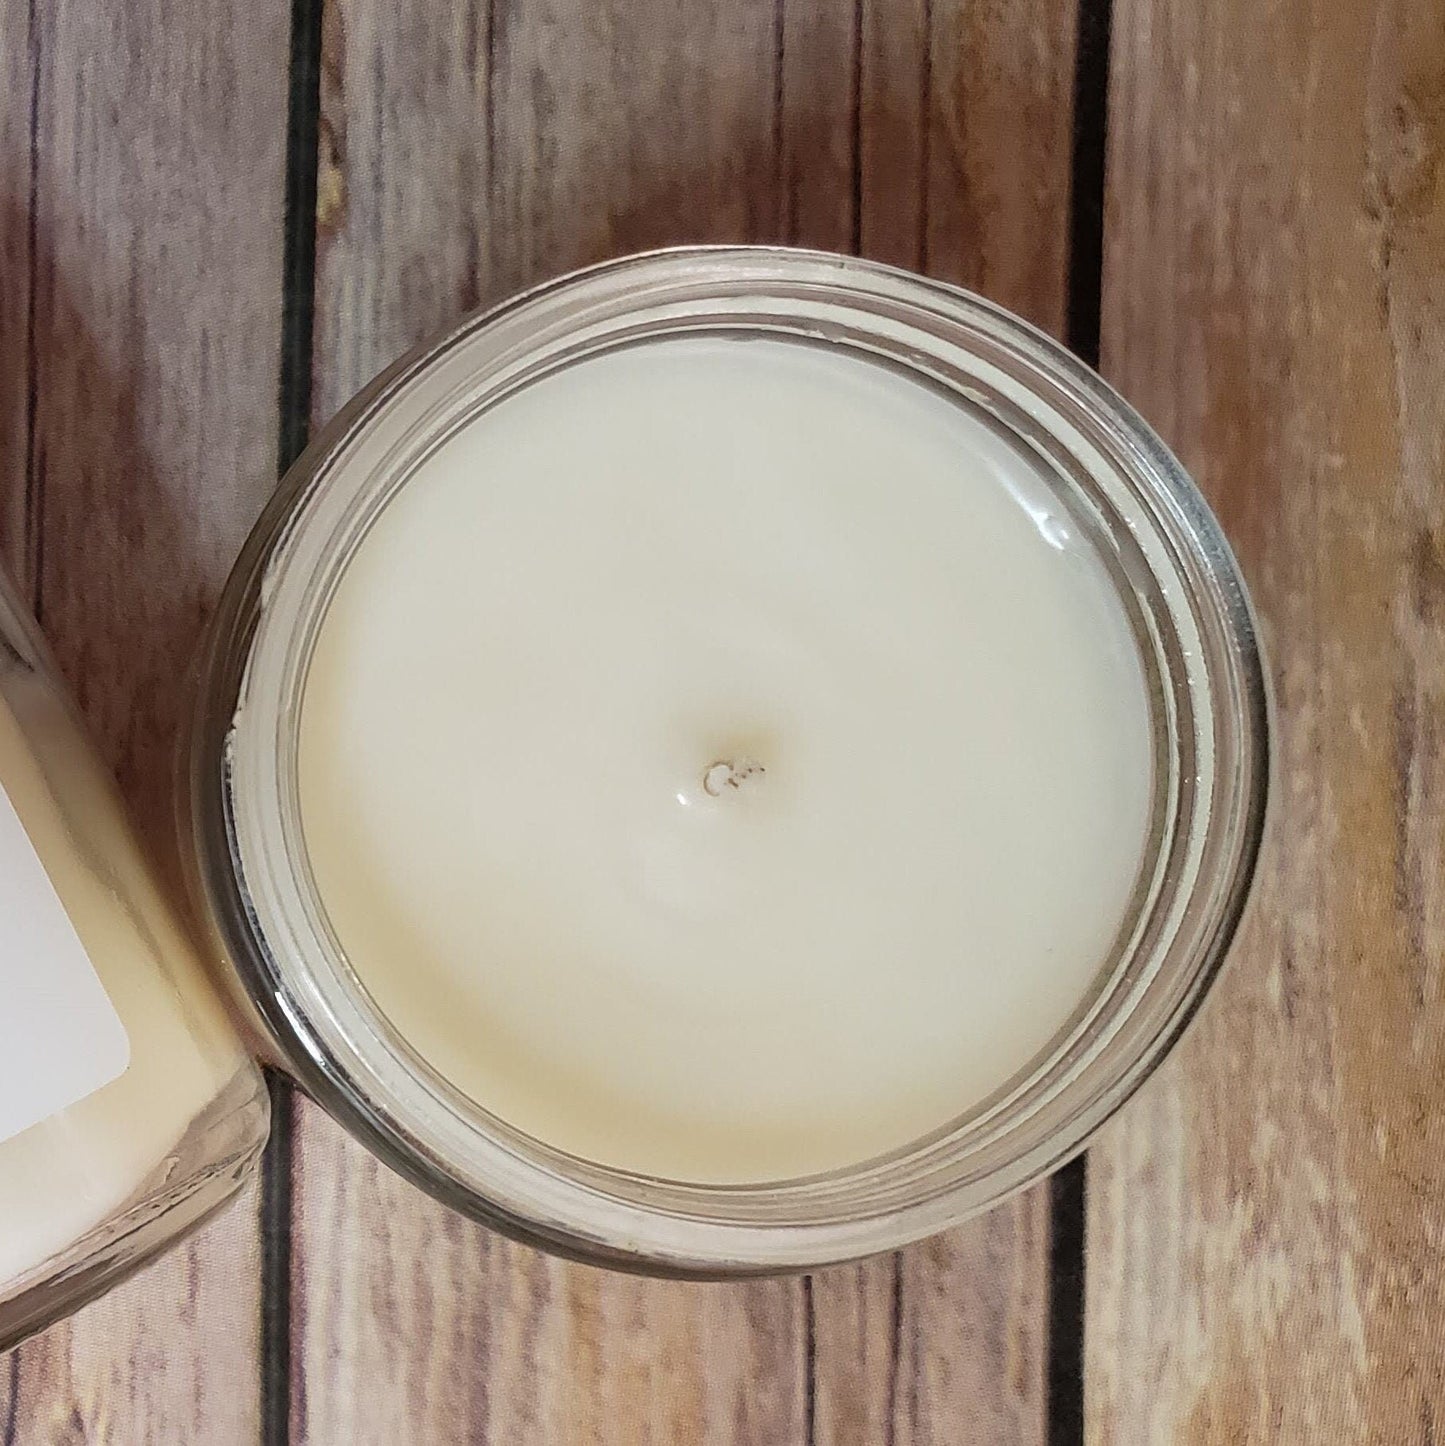 Ivy Creek No. 19 Plum Cashmere Soy Blend Candle | Hand-Poured | 7 oz | Cotton Wick | Small Batch | Clean Burning | Container Candle